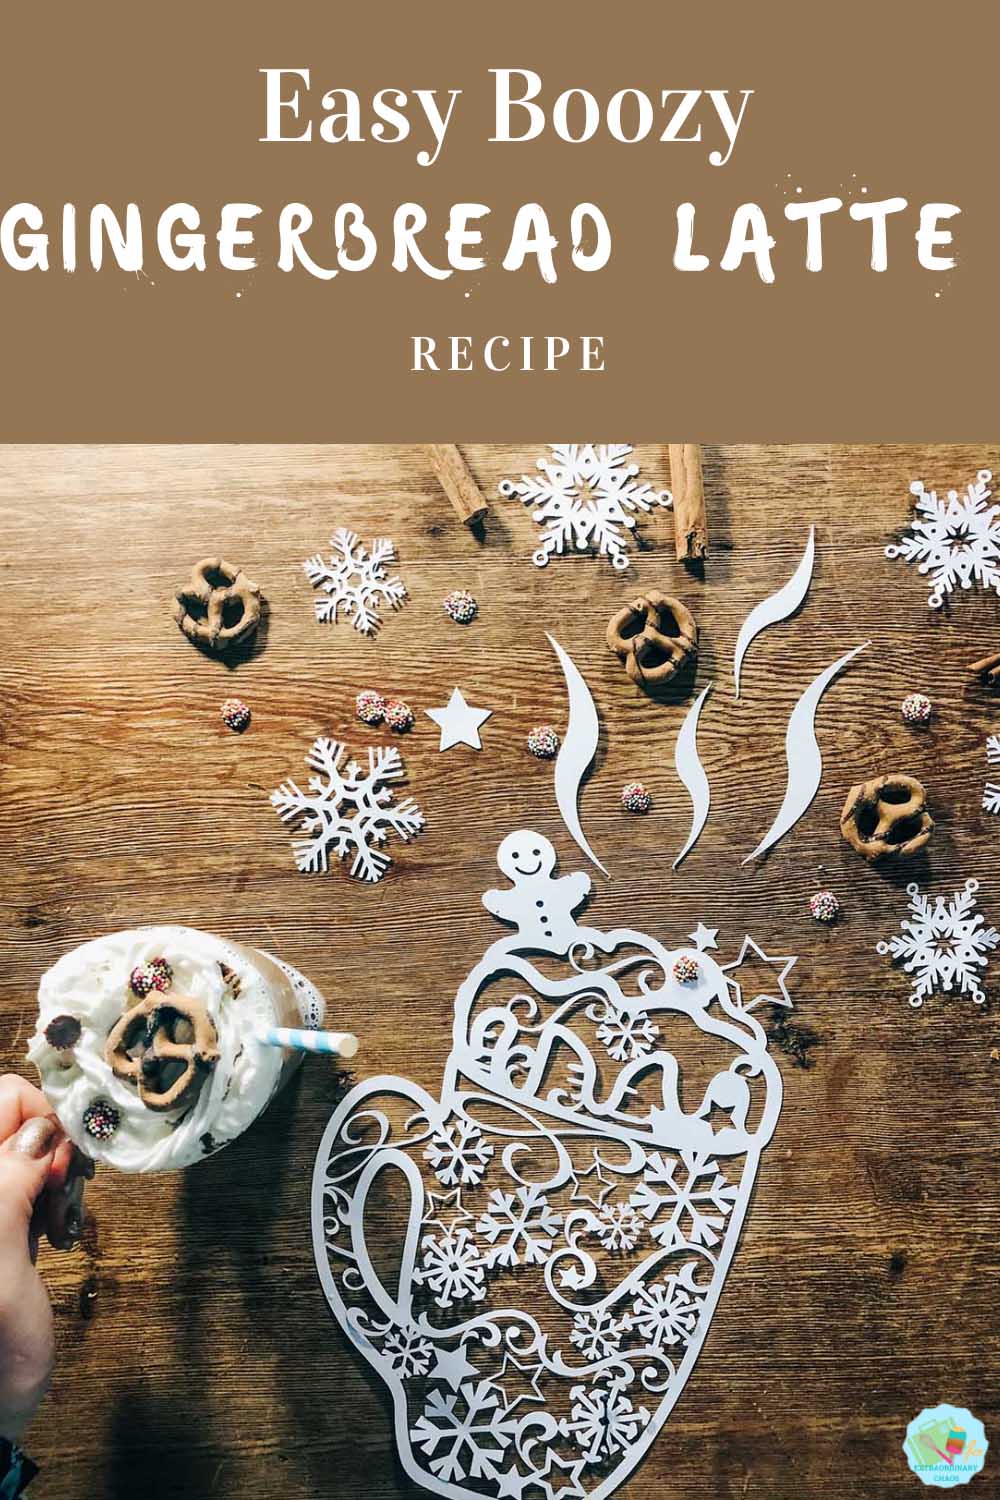 Easy Boozy Home Made Gingerbread Latte Recipe -2